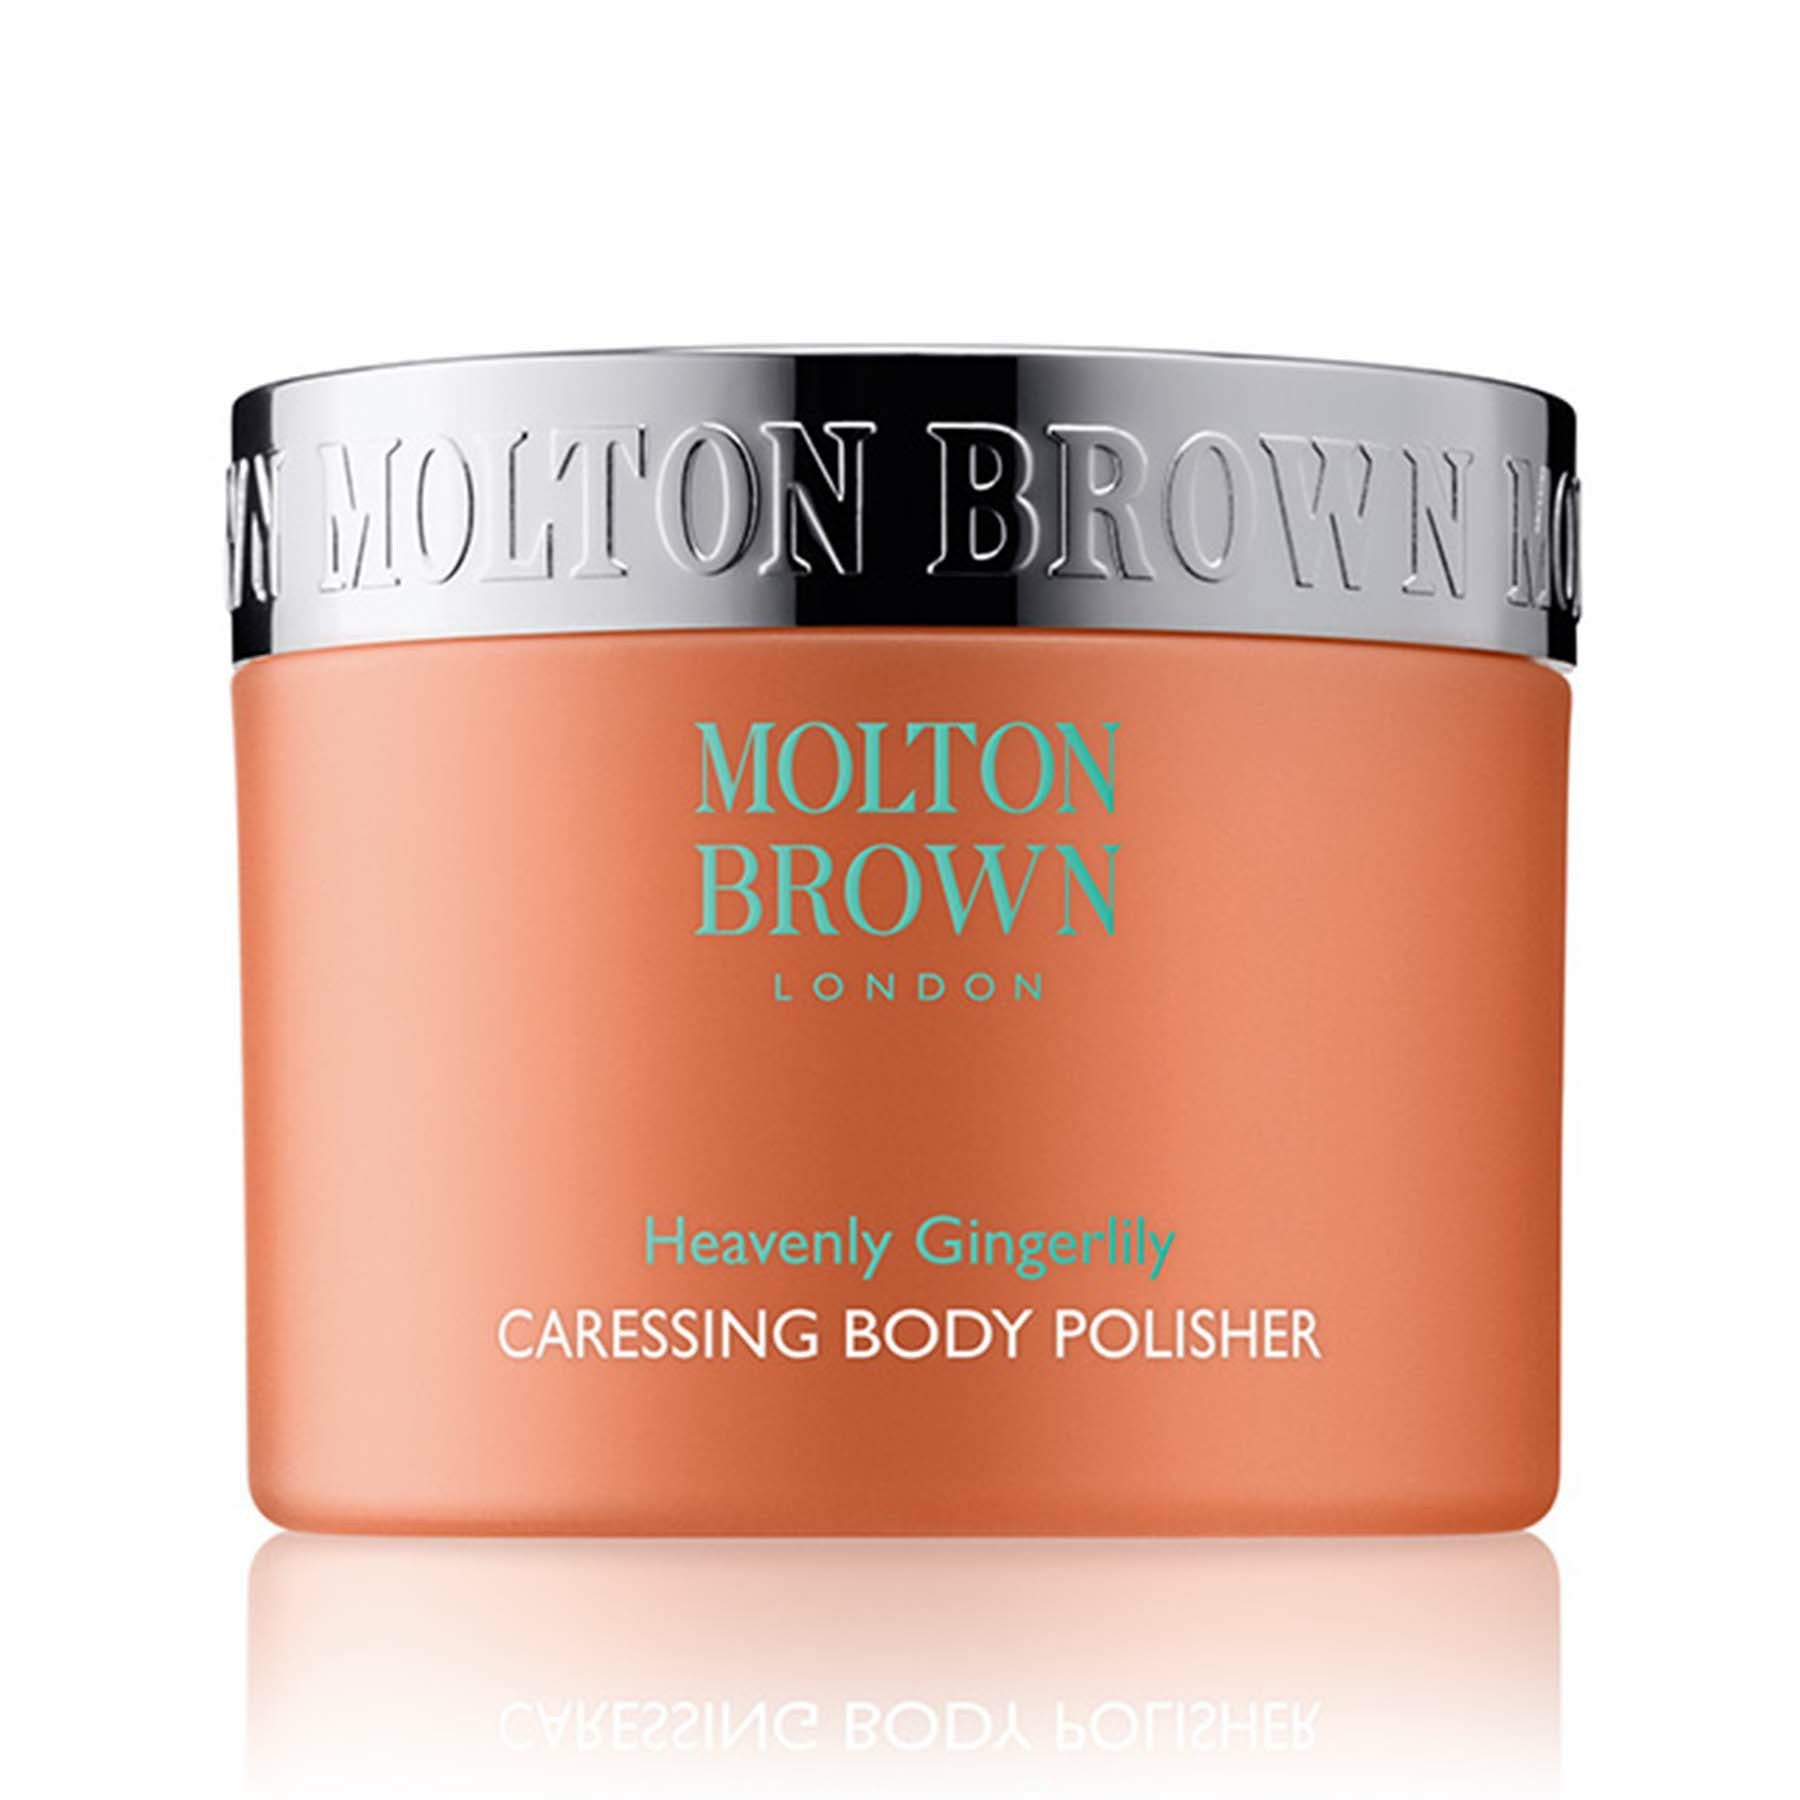 Molton Brown Heavenly Gingerlily Body Polisher